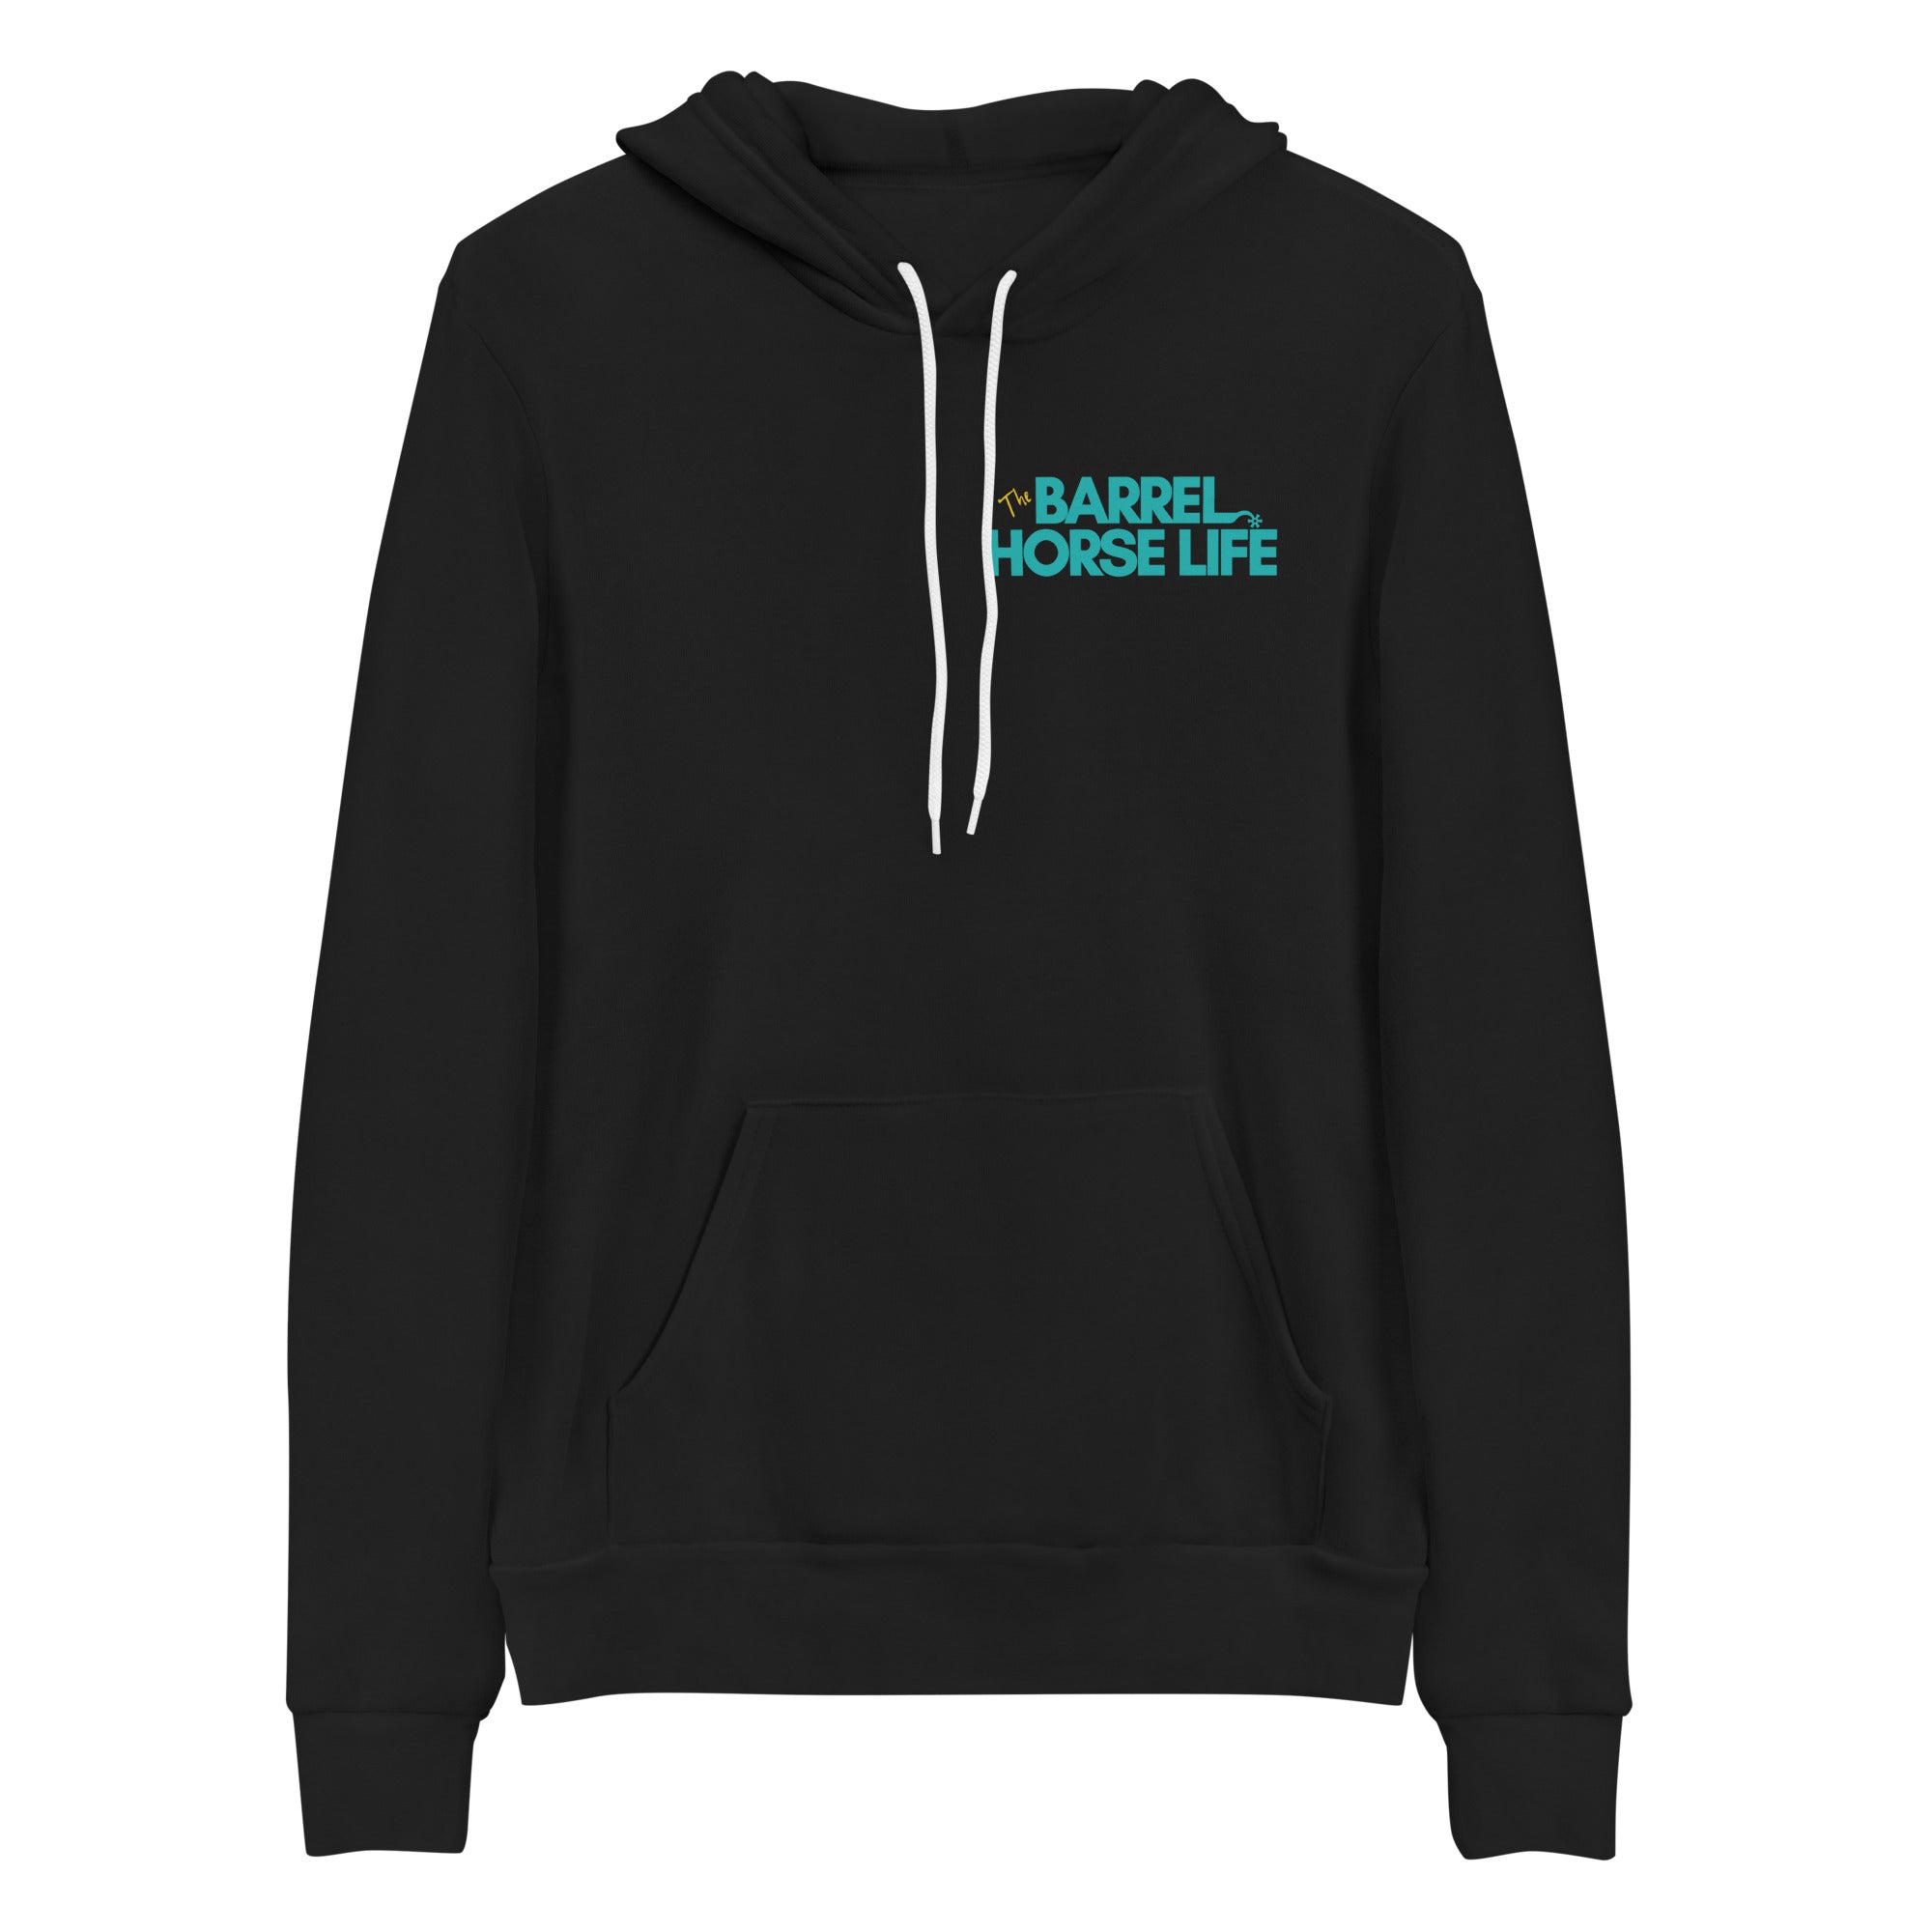 Hustle Grit & No Quit (The Most Comfortable Hoodie)